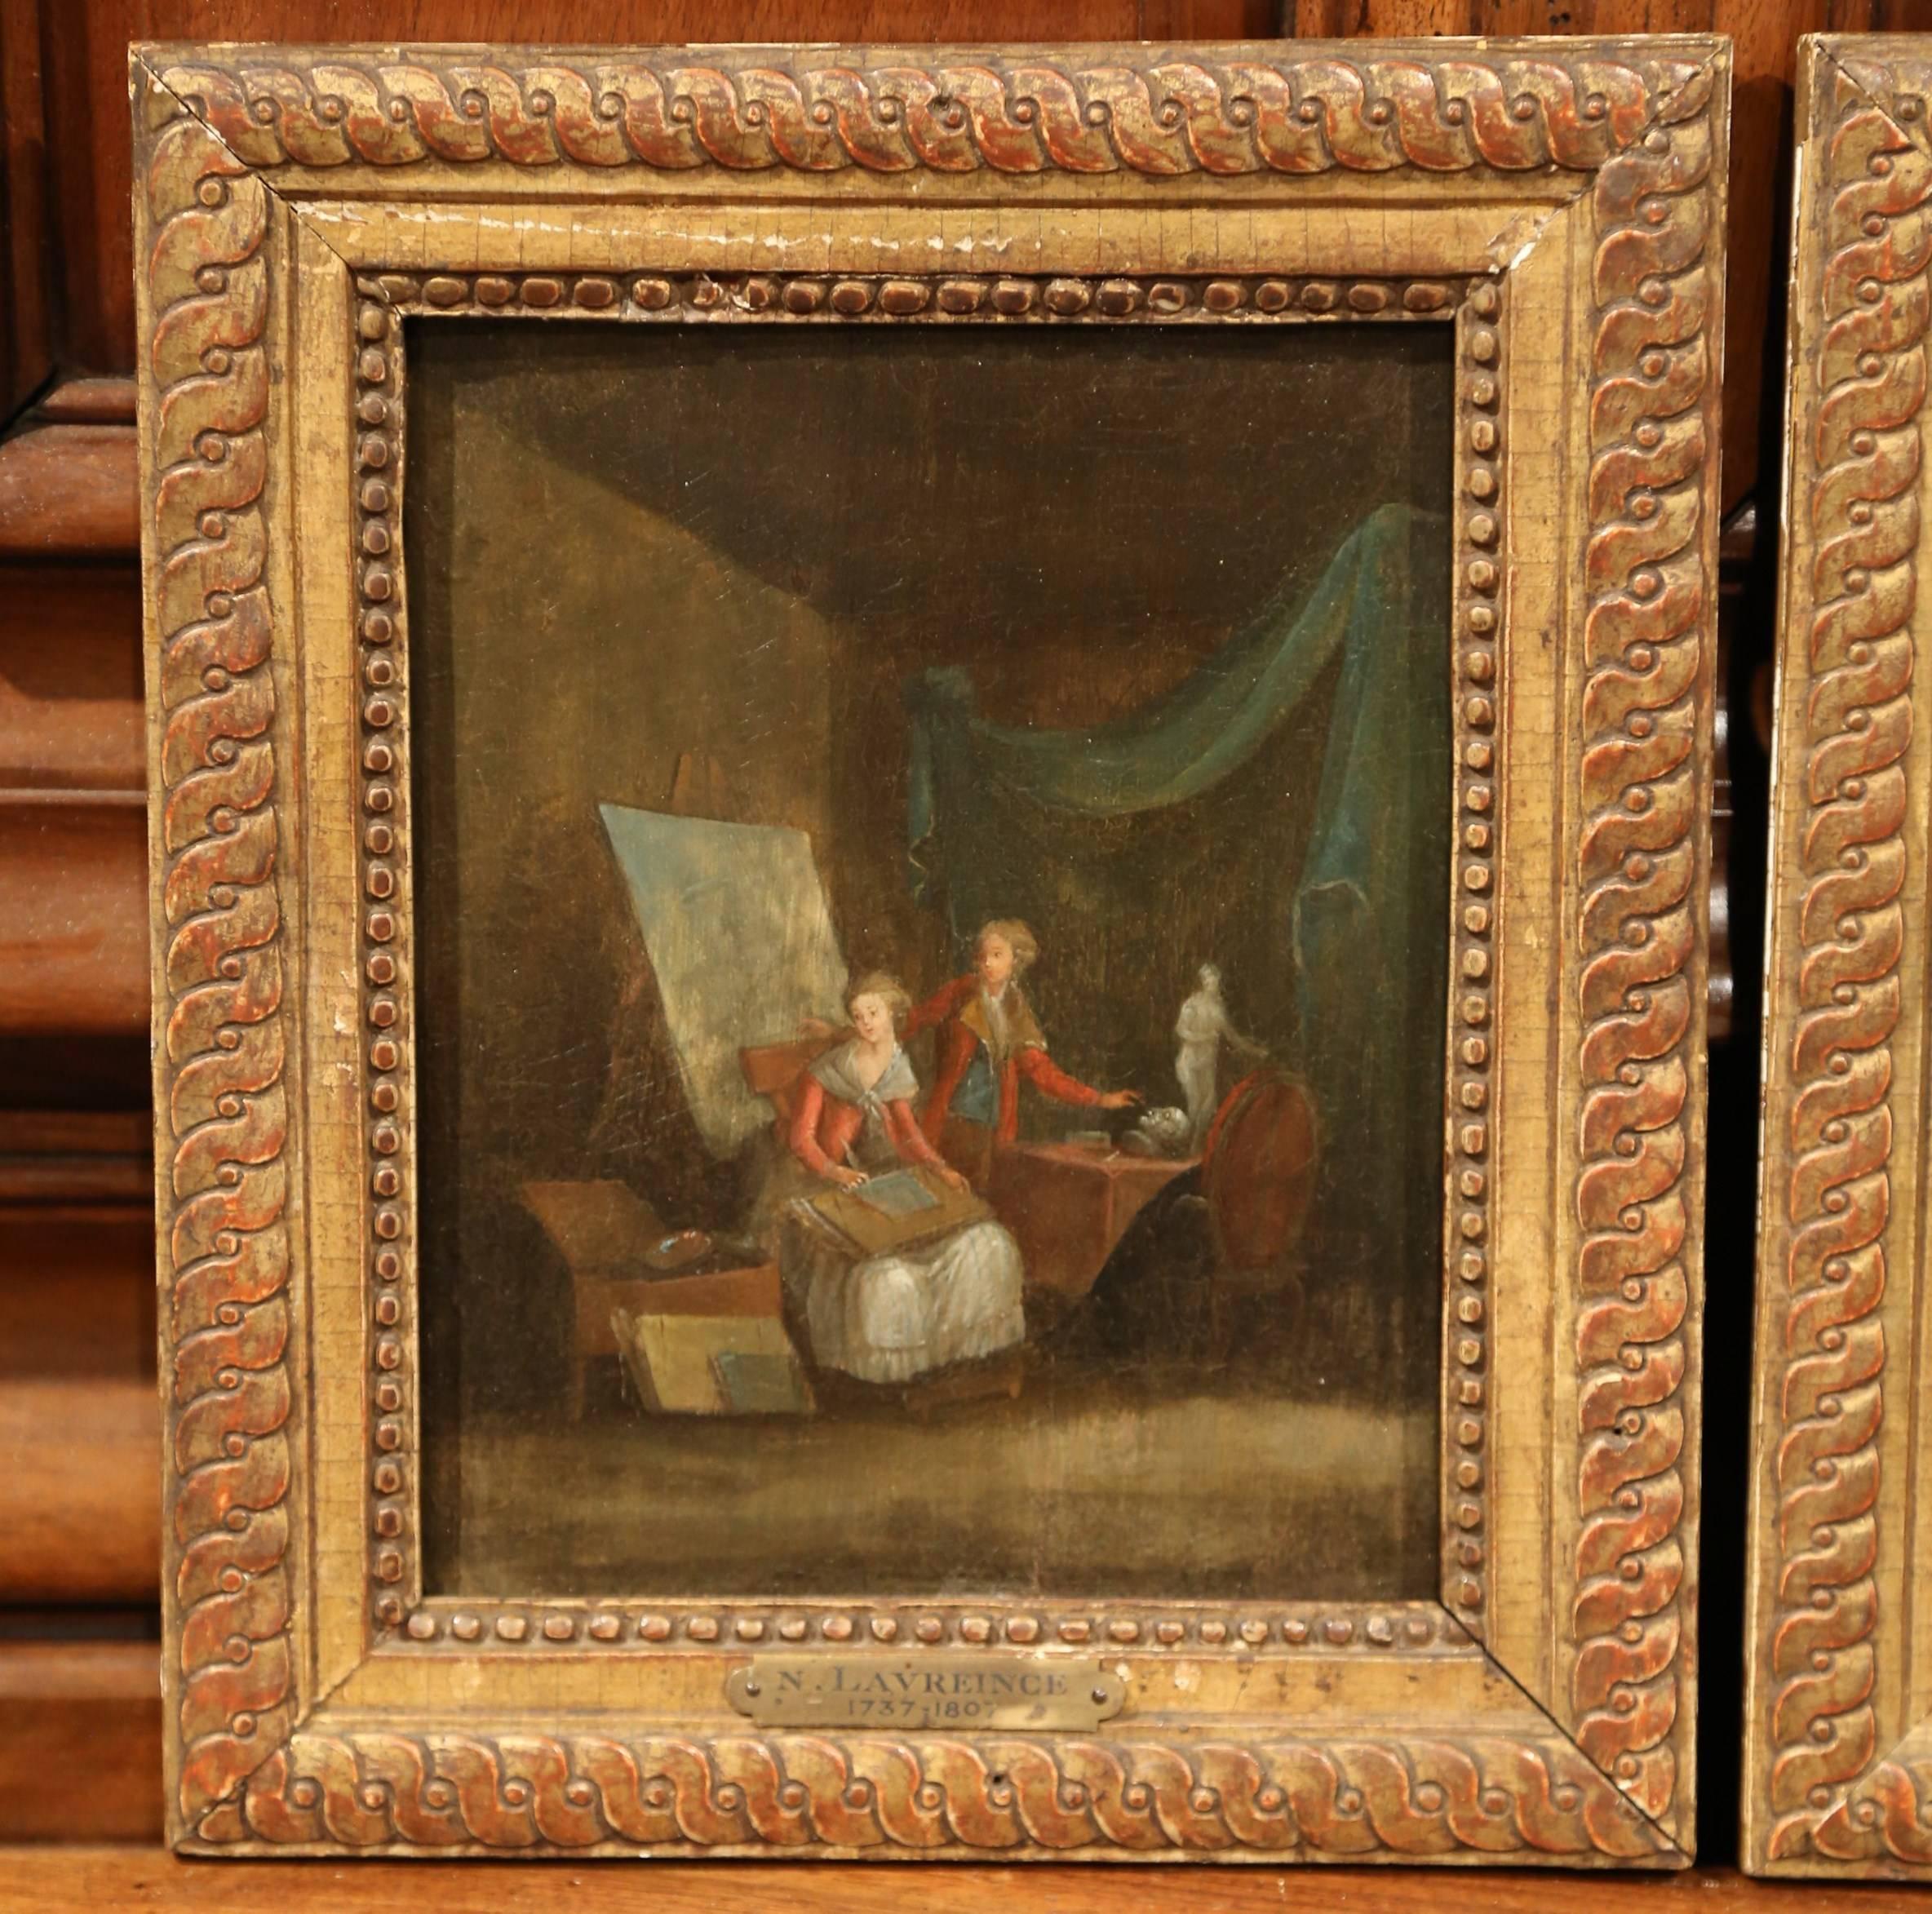 Pair of 18th Century Paintings on Board in Gilt Frames Signed N. Lavreince - Brown Interior Painting by Niklas Lavreince